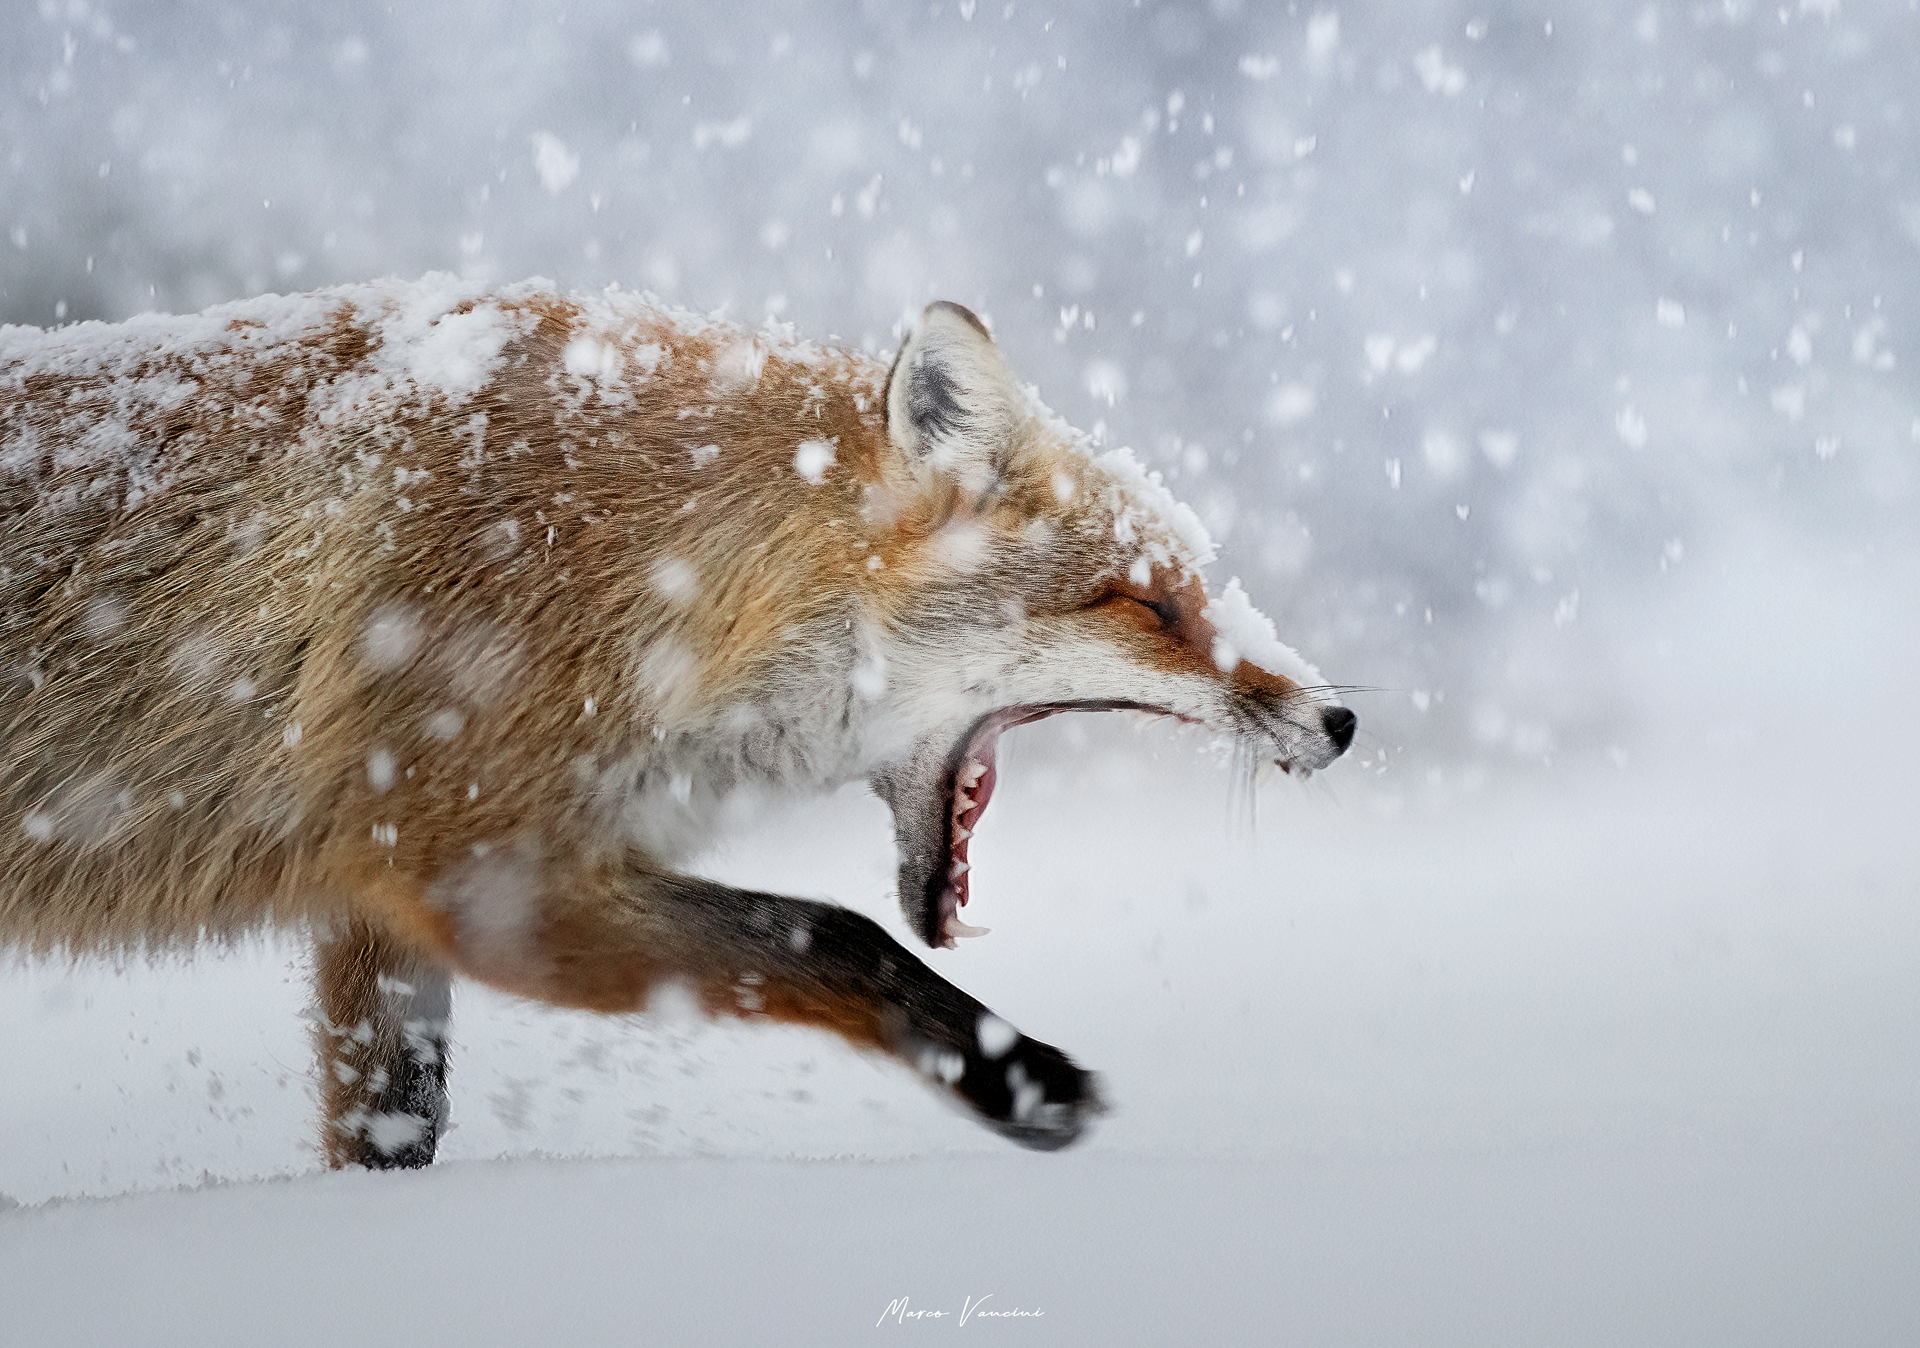 The passage of the fox ...